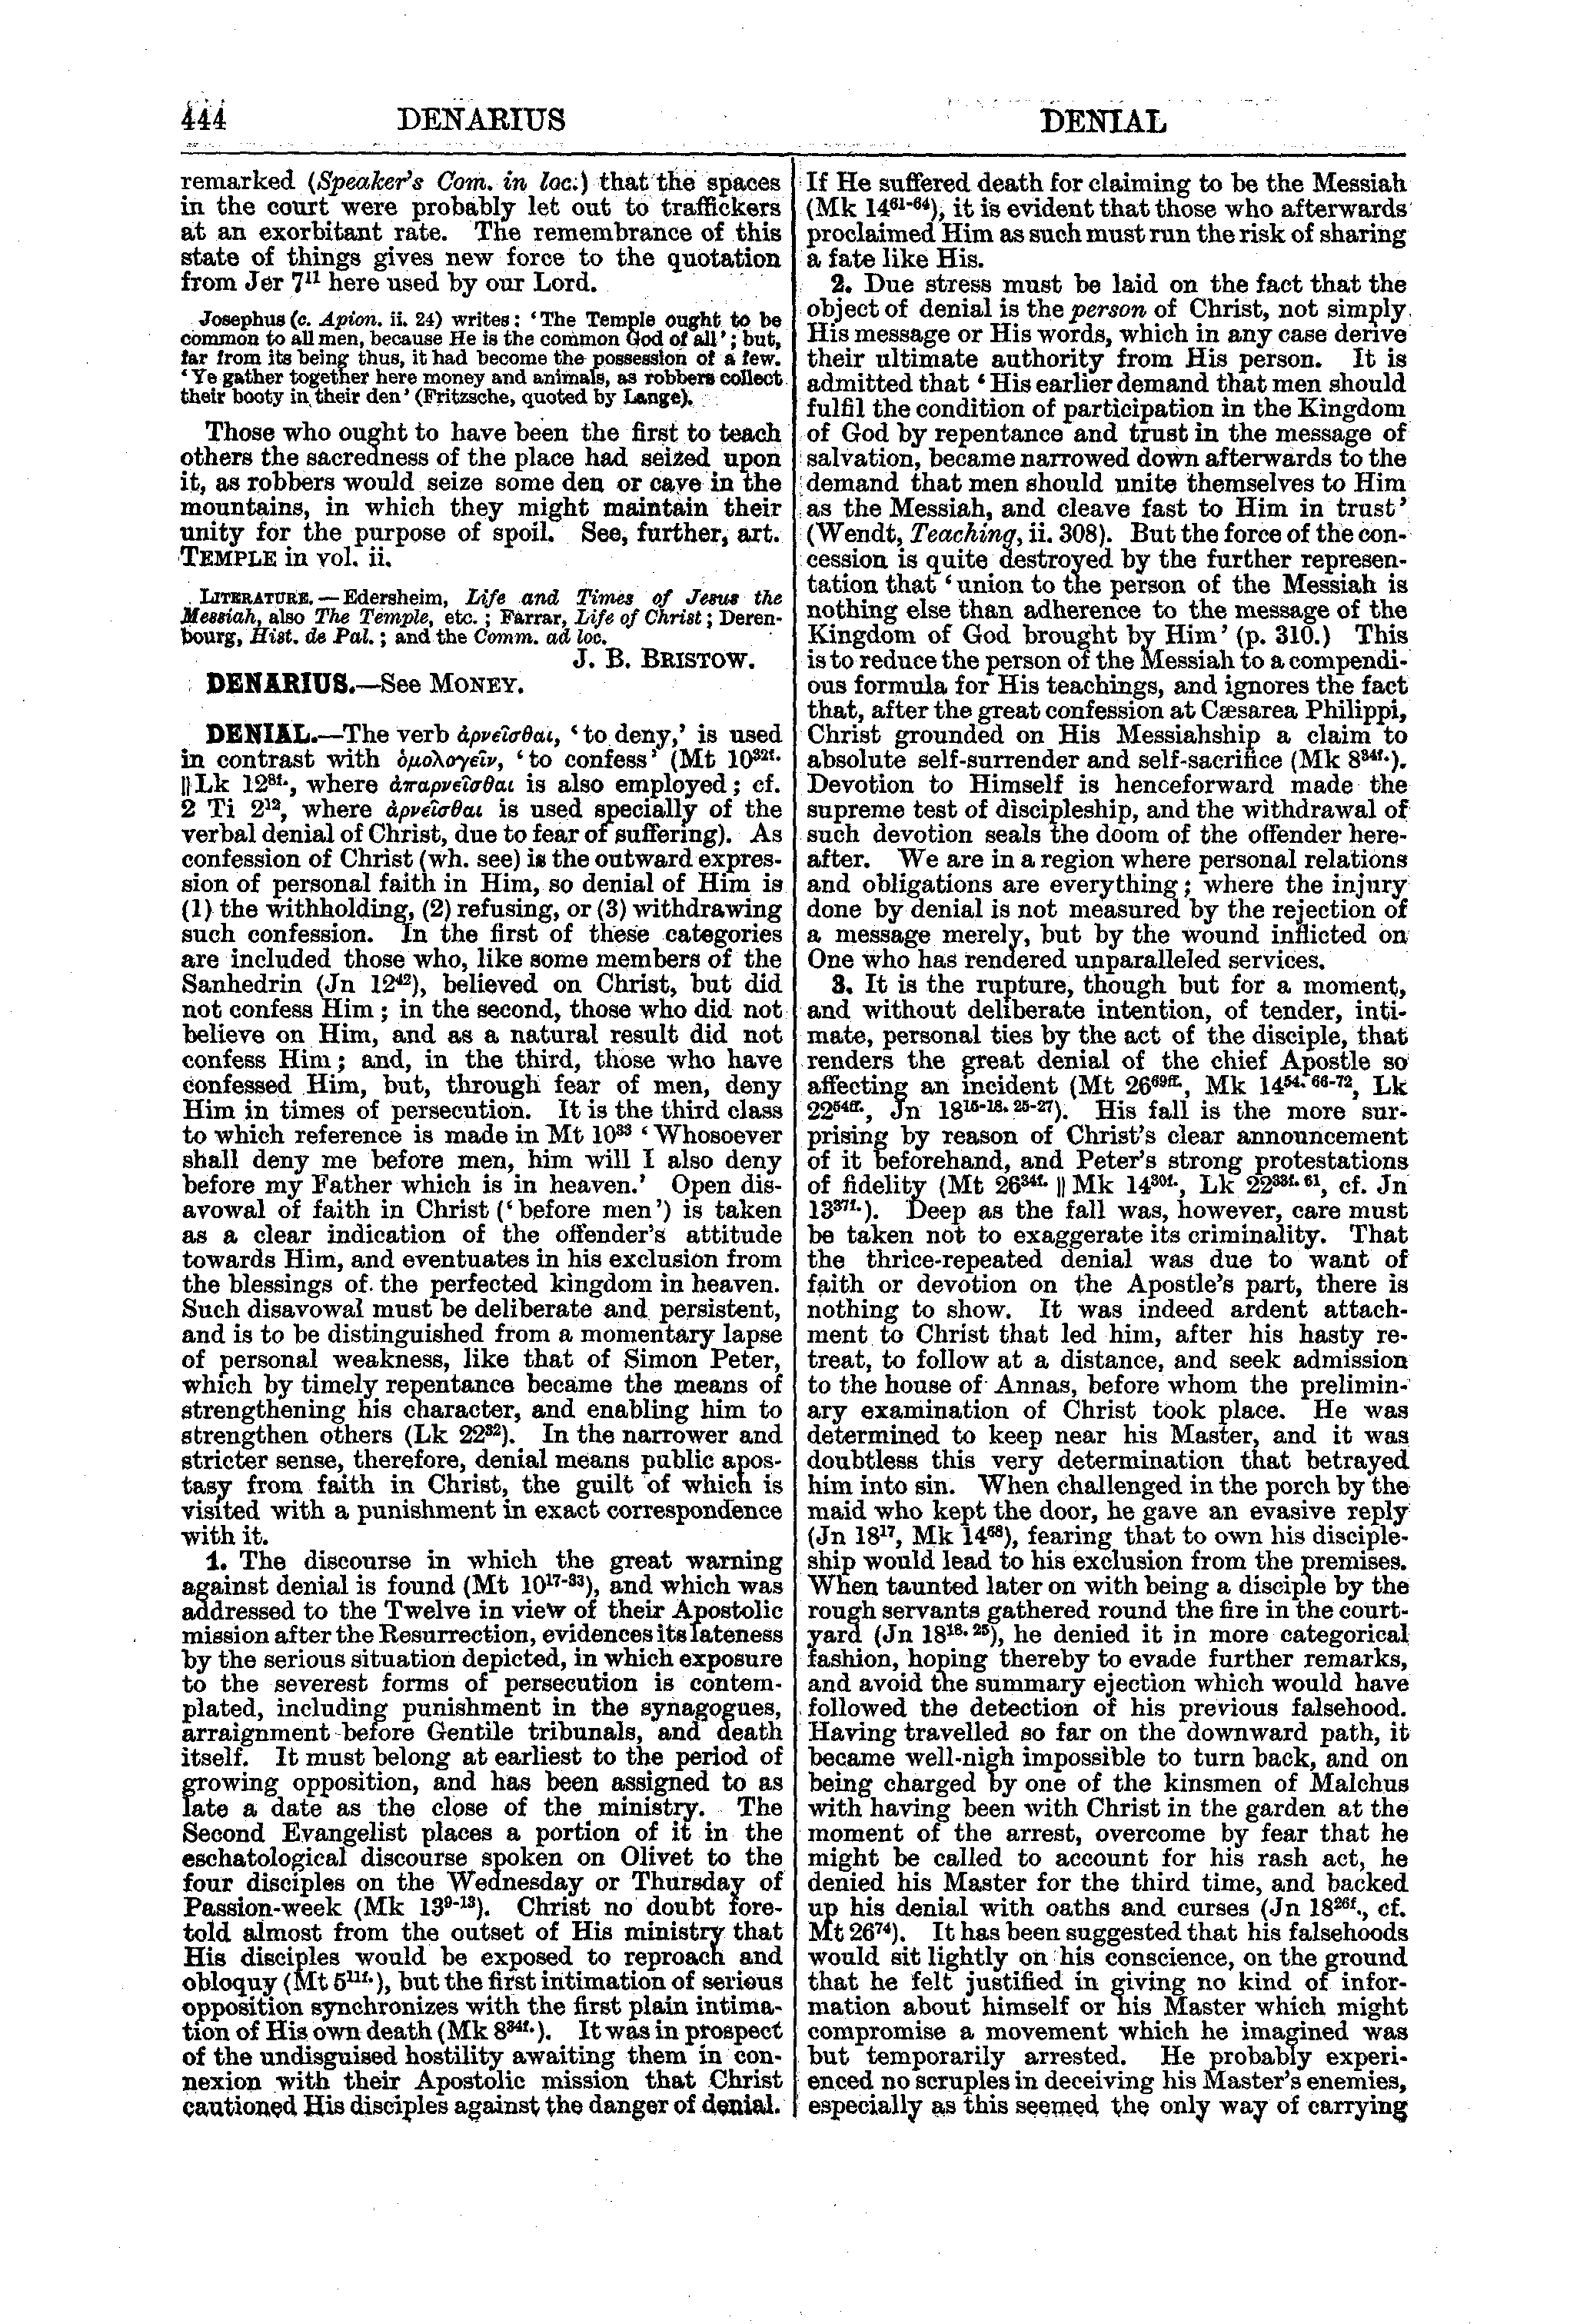 Image of page 444